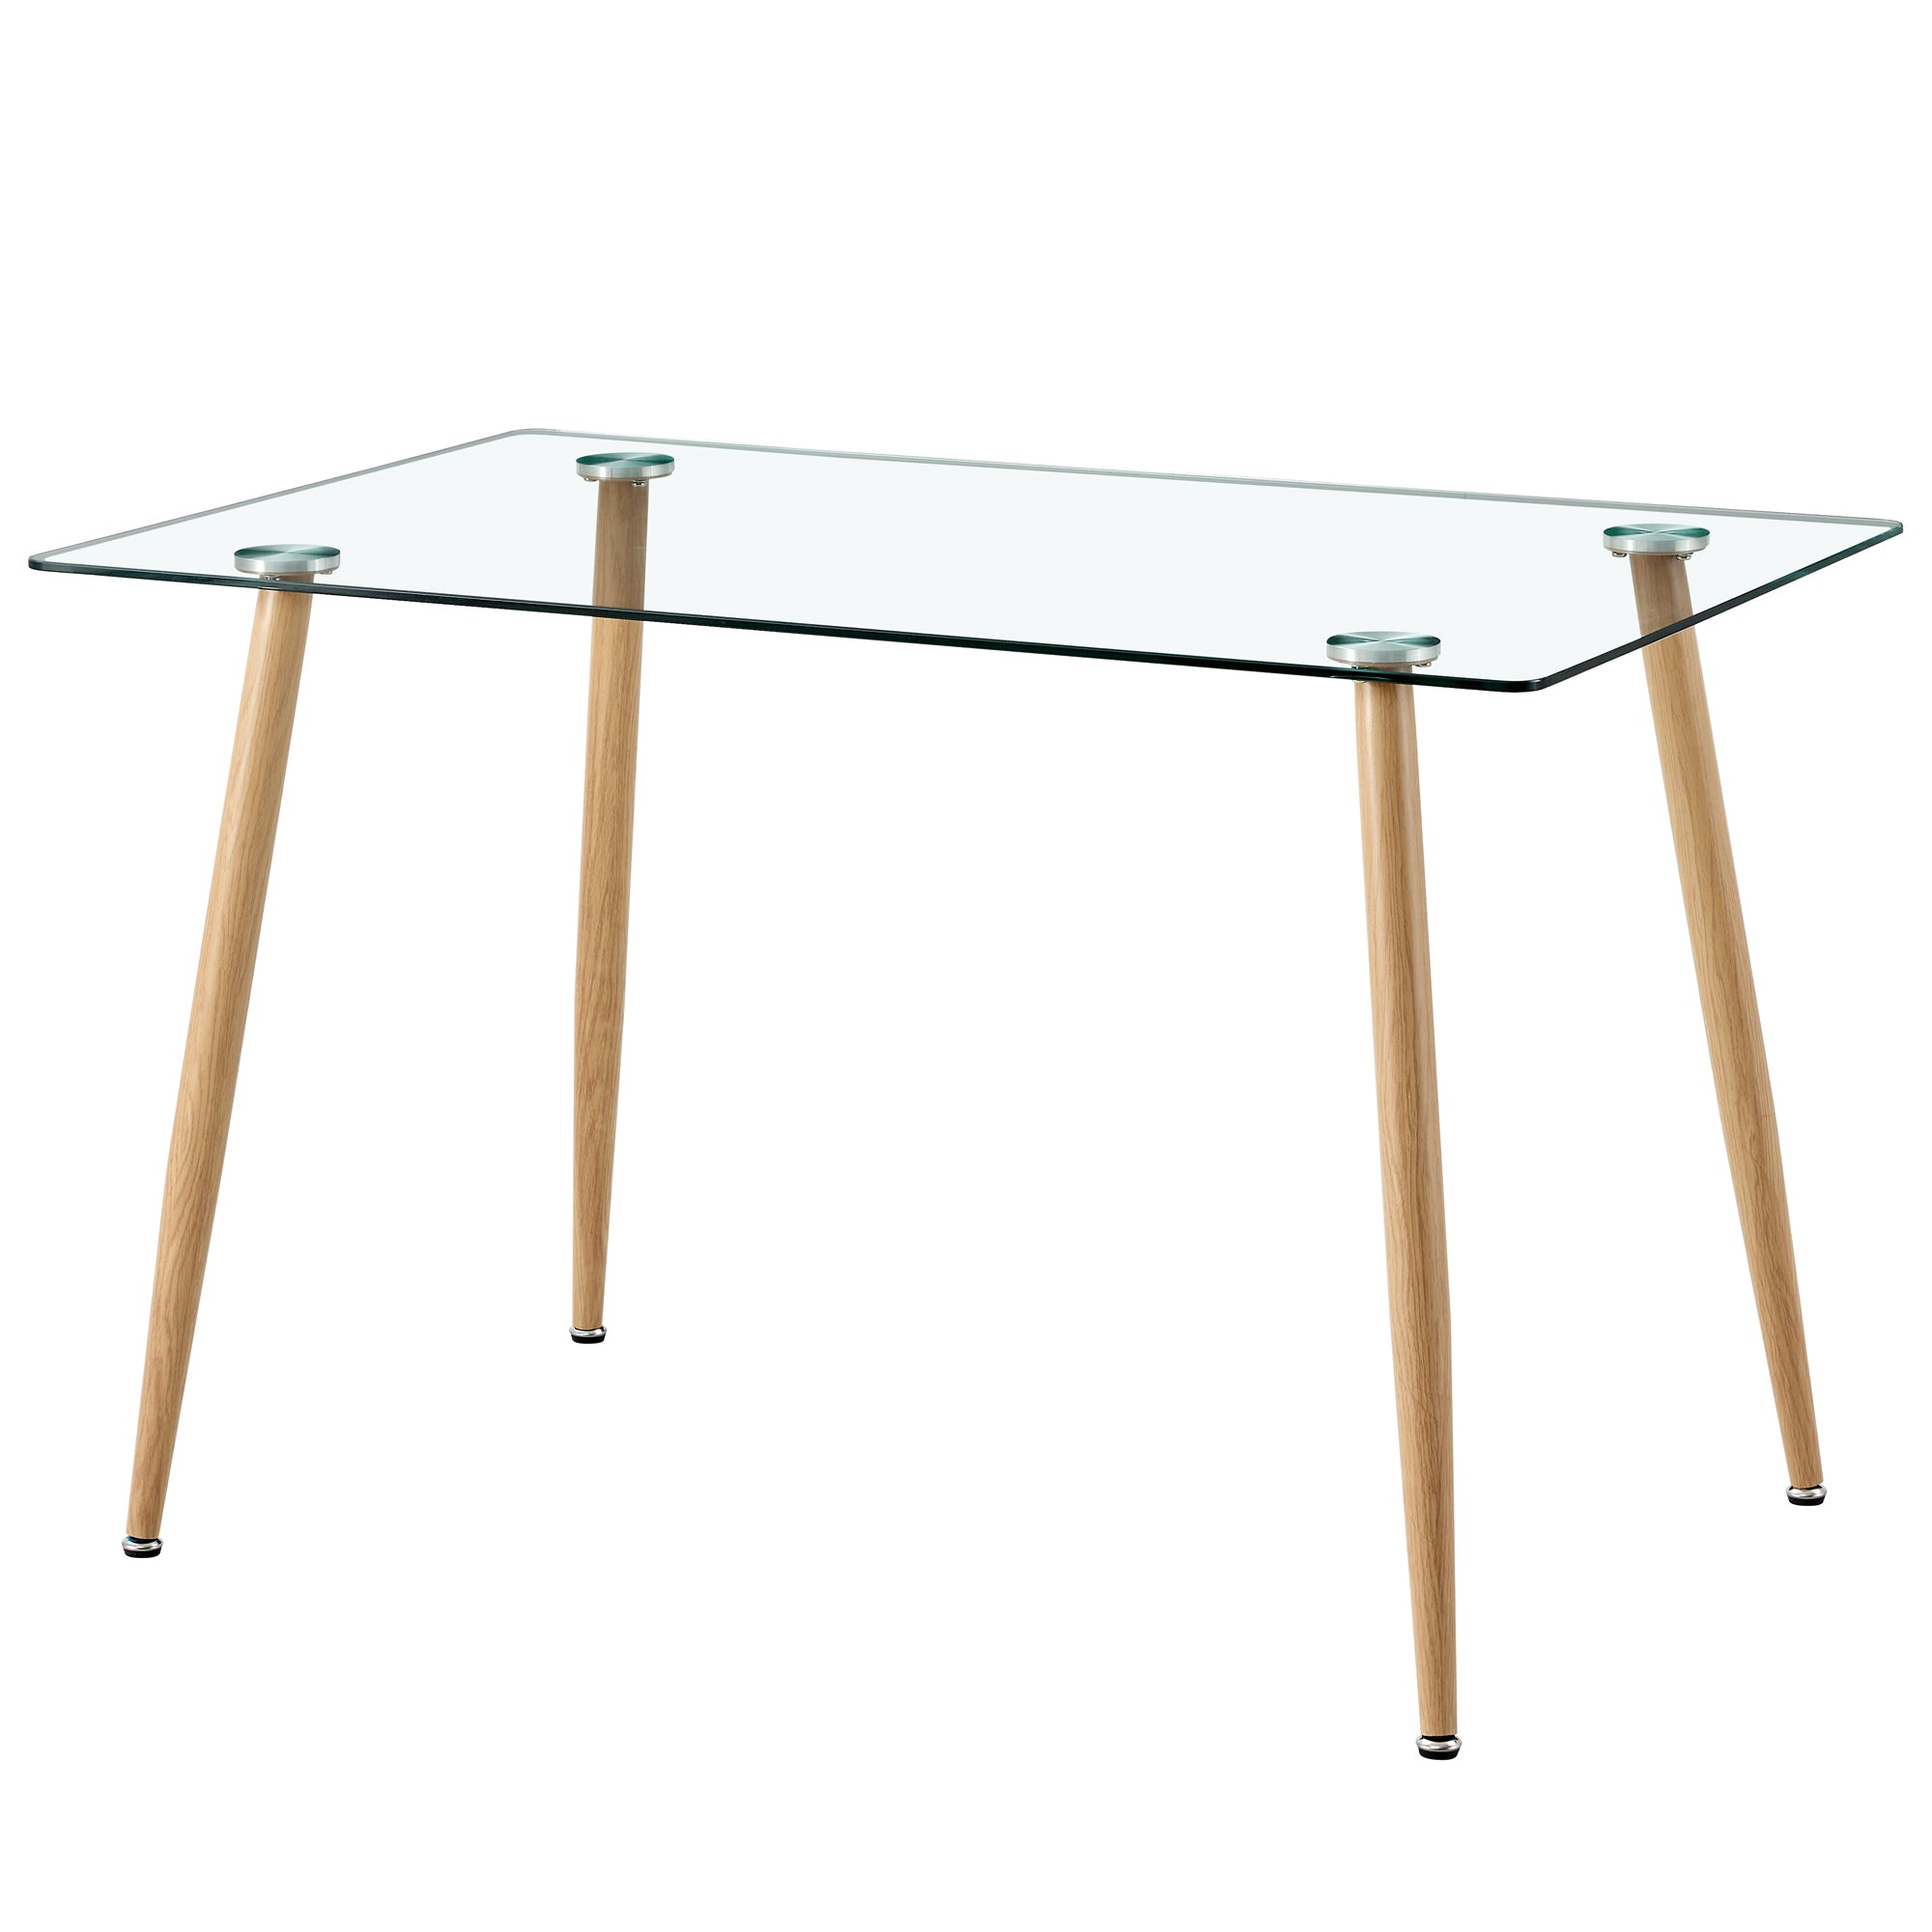 Modern Minimalist Rectangular Glass Dining Table for 4-6 with 0.31" Tempered Glass Tabletop and Wood color Coating Metal Legs - Transparent